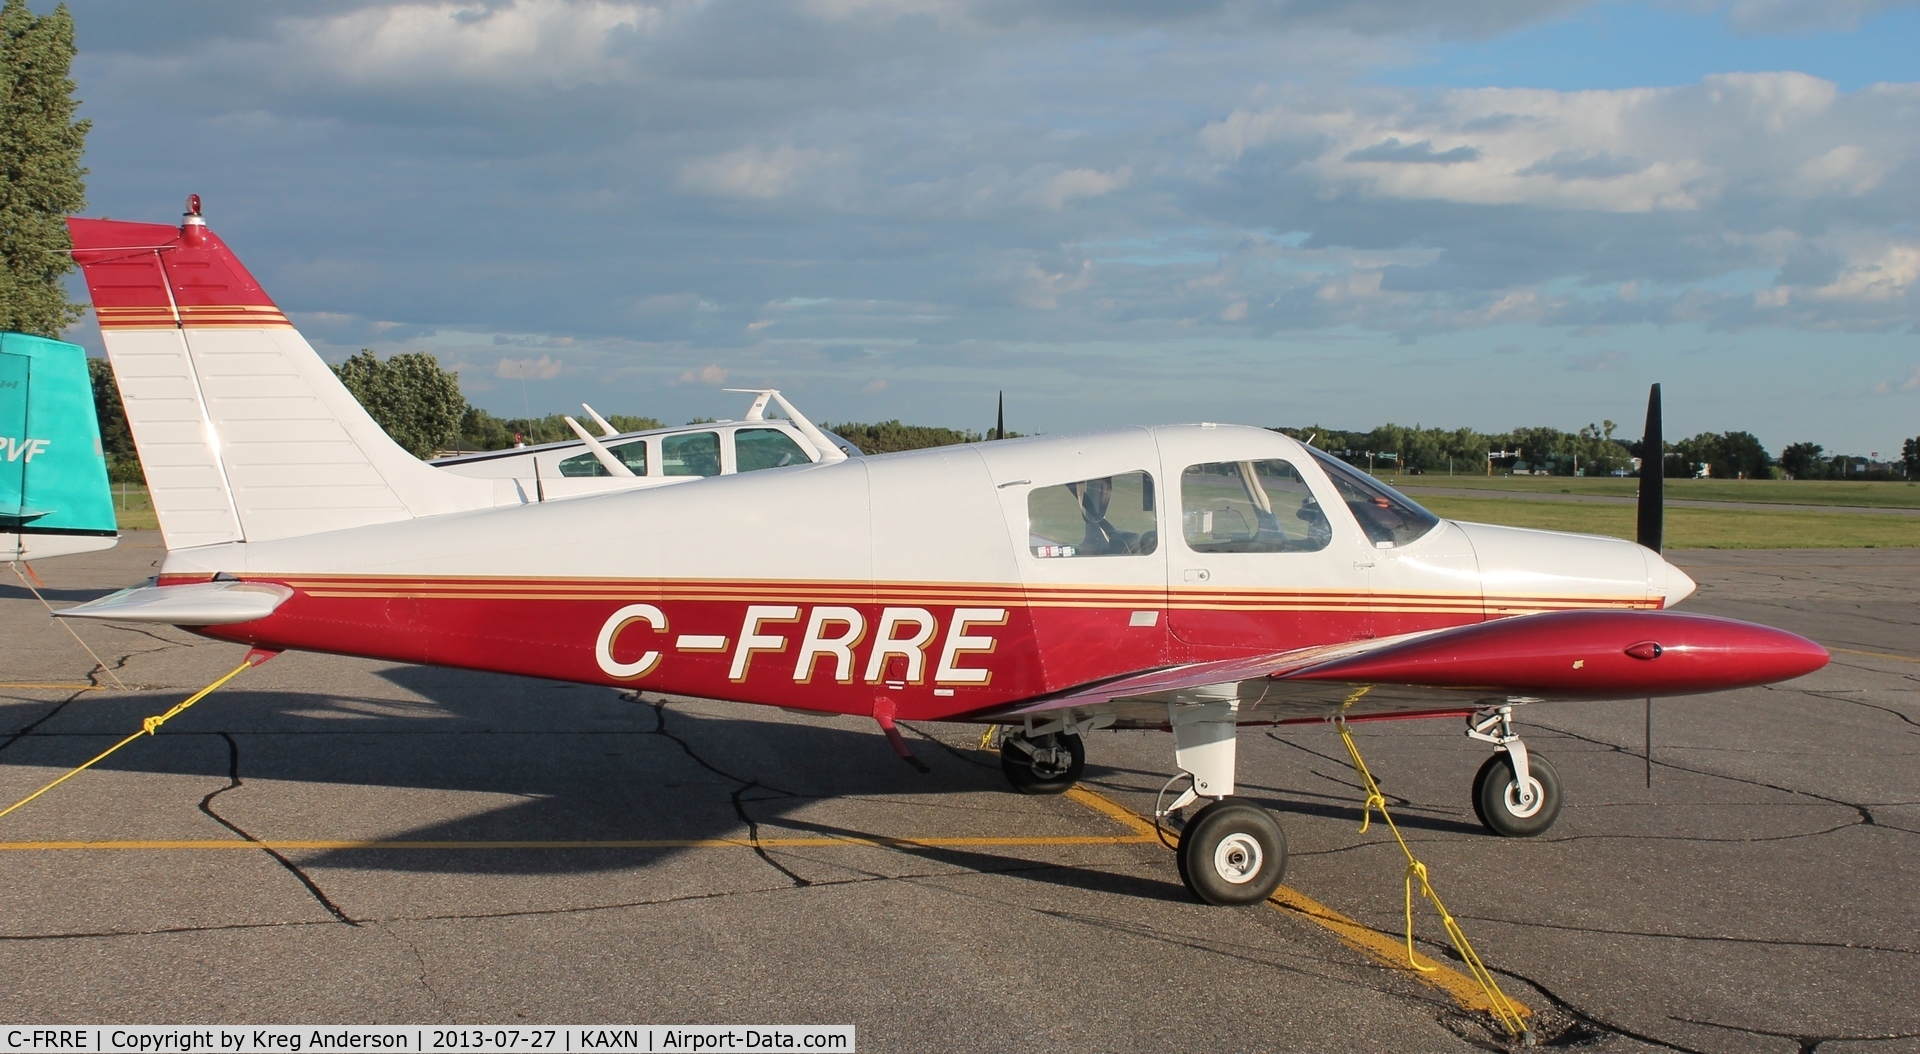 C-FRRE, 1974 Piper PA-28-140 Cruiser C/N 28-7525082, Piper PA-28-140 Cherokee on the line.